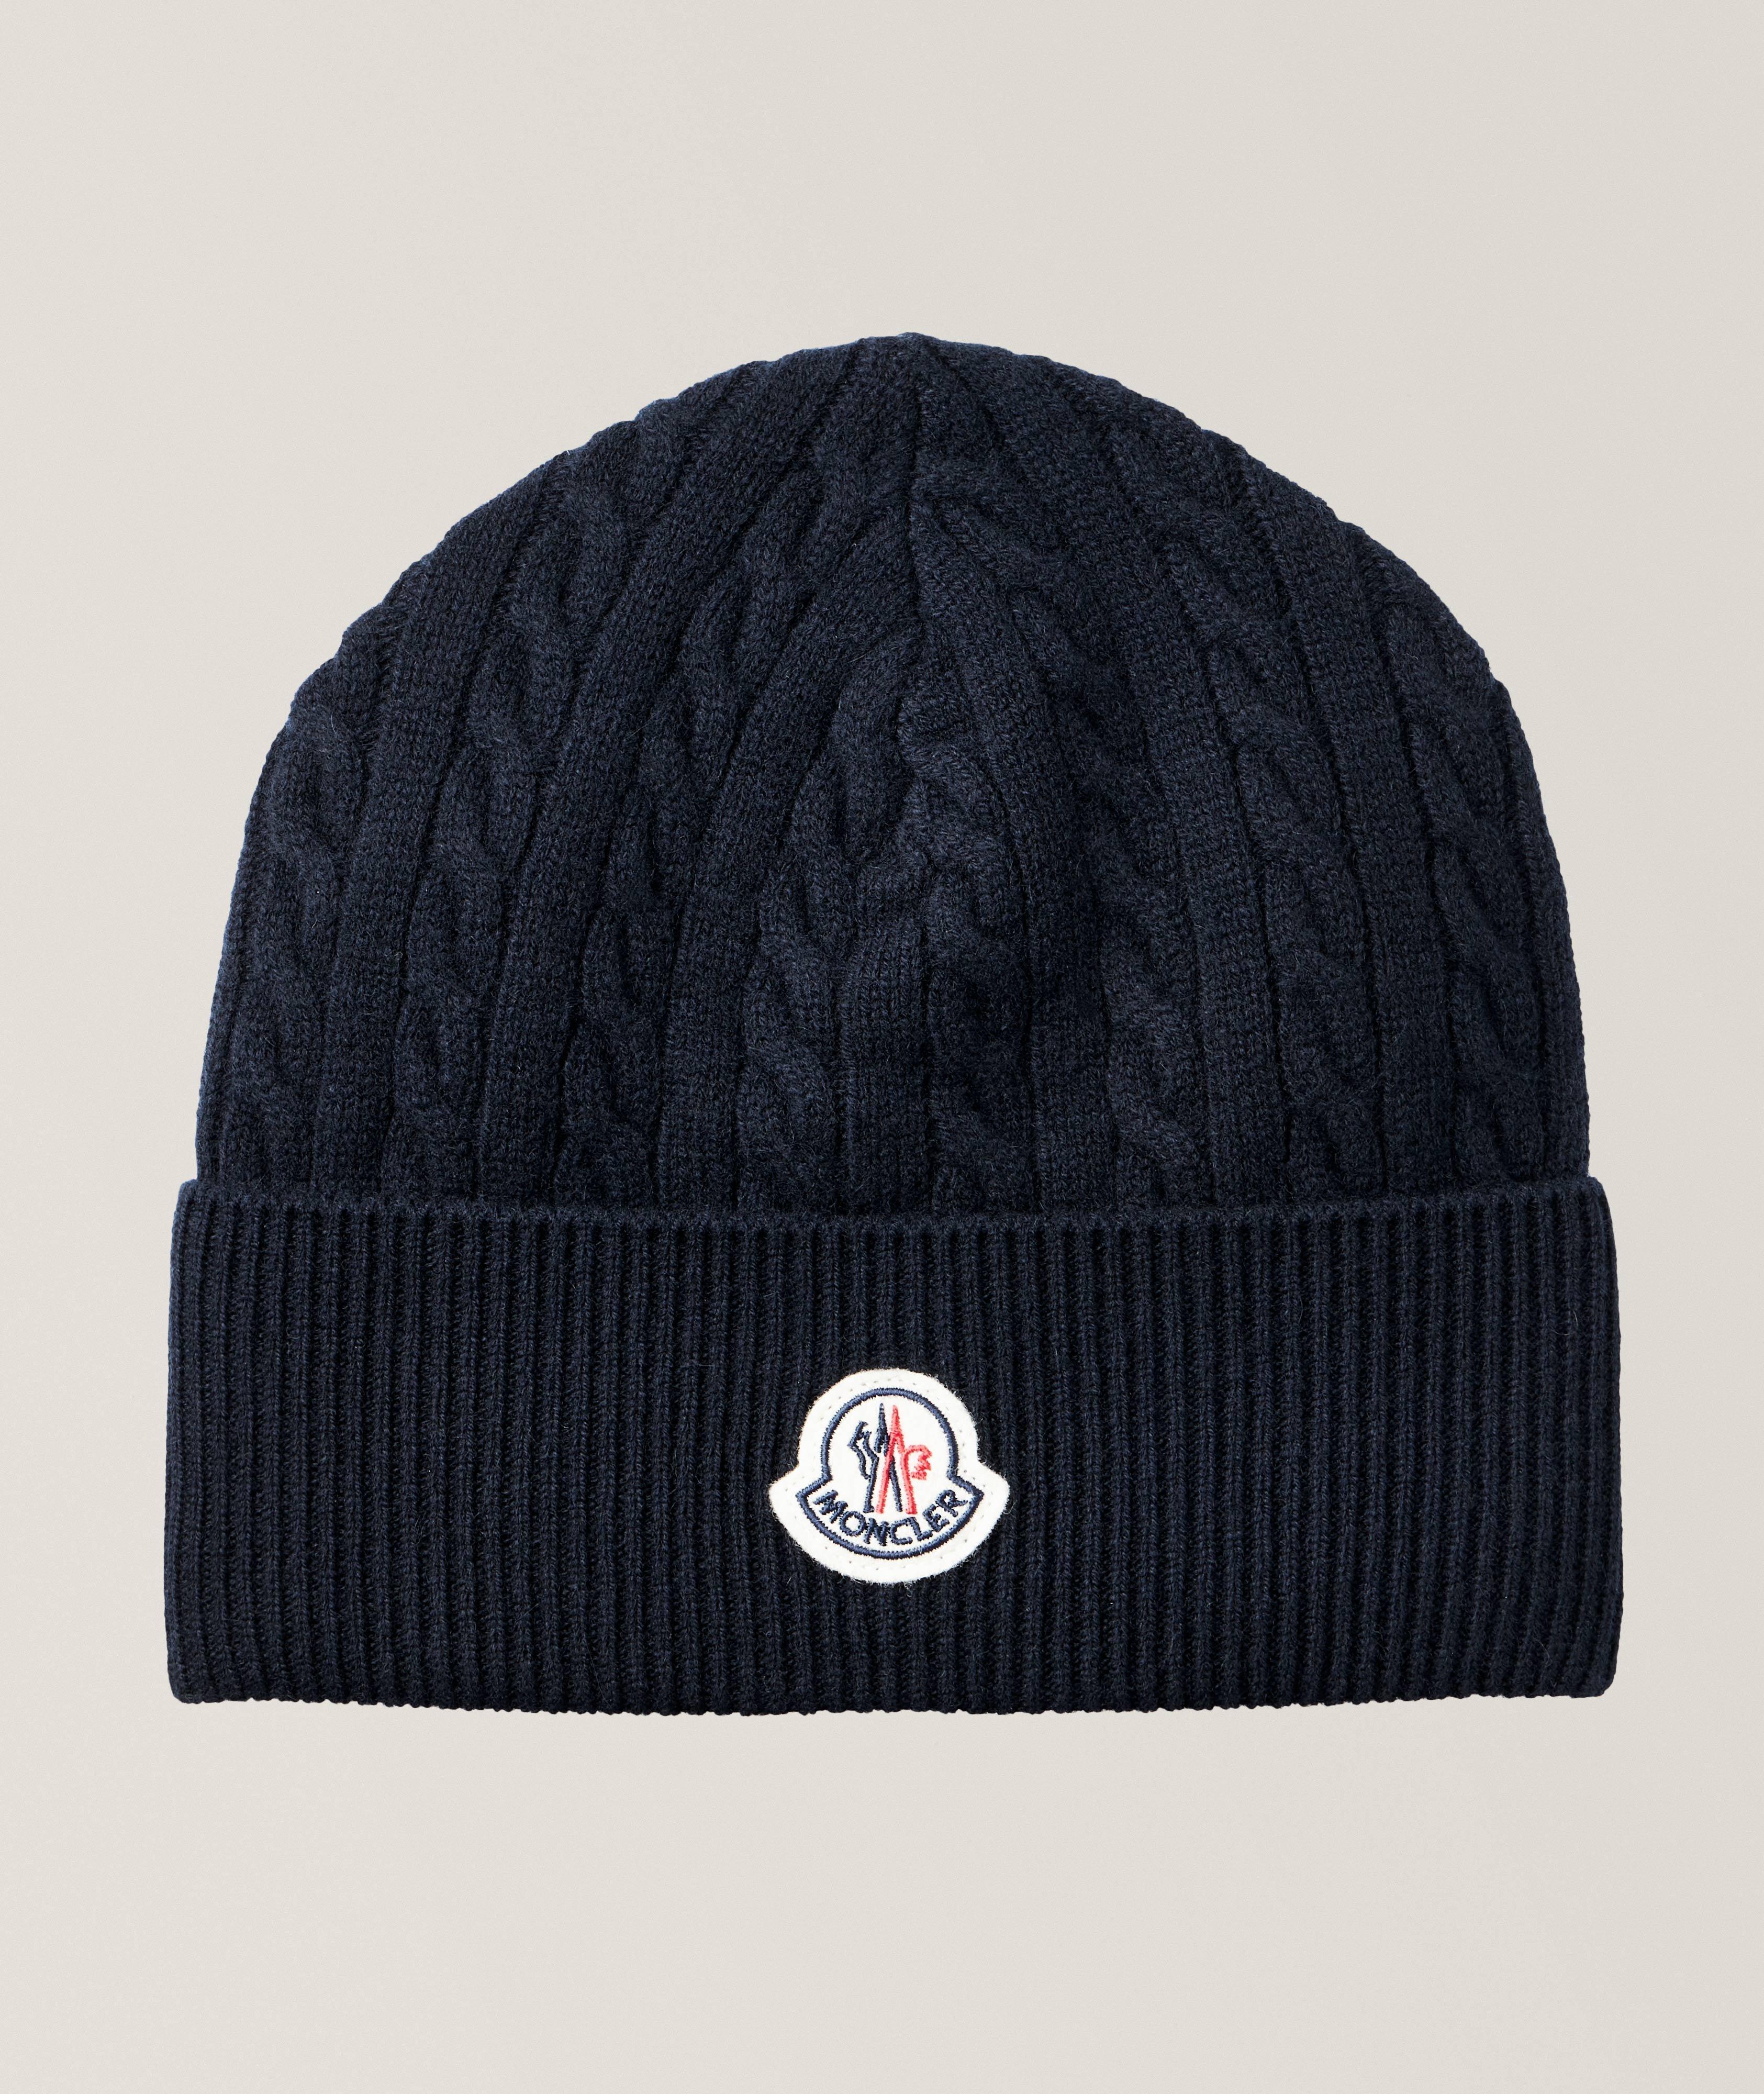 Ribbed Wool-Cashmere Beanie  image 0